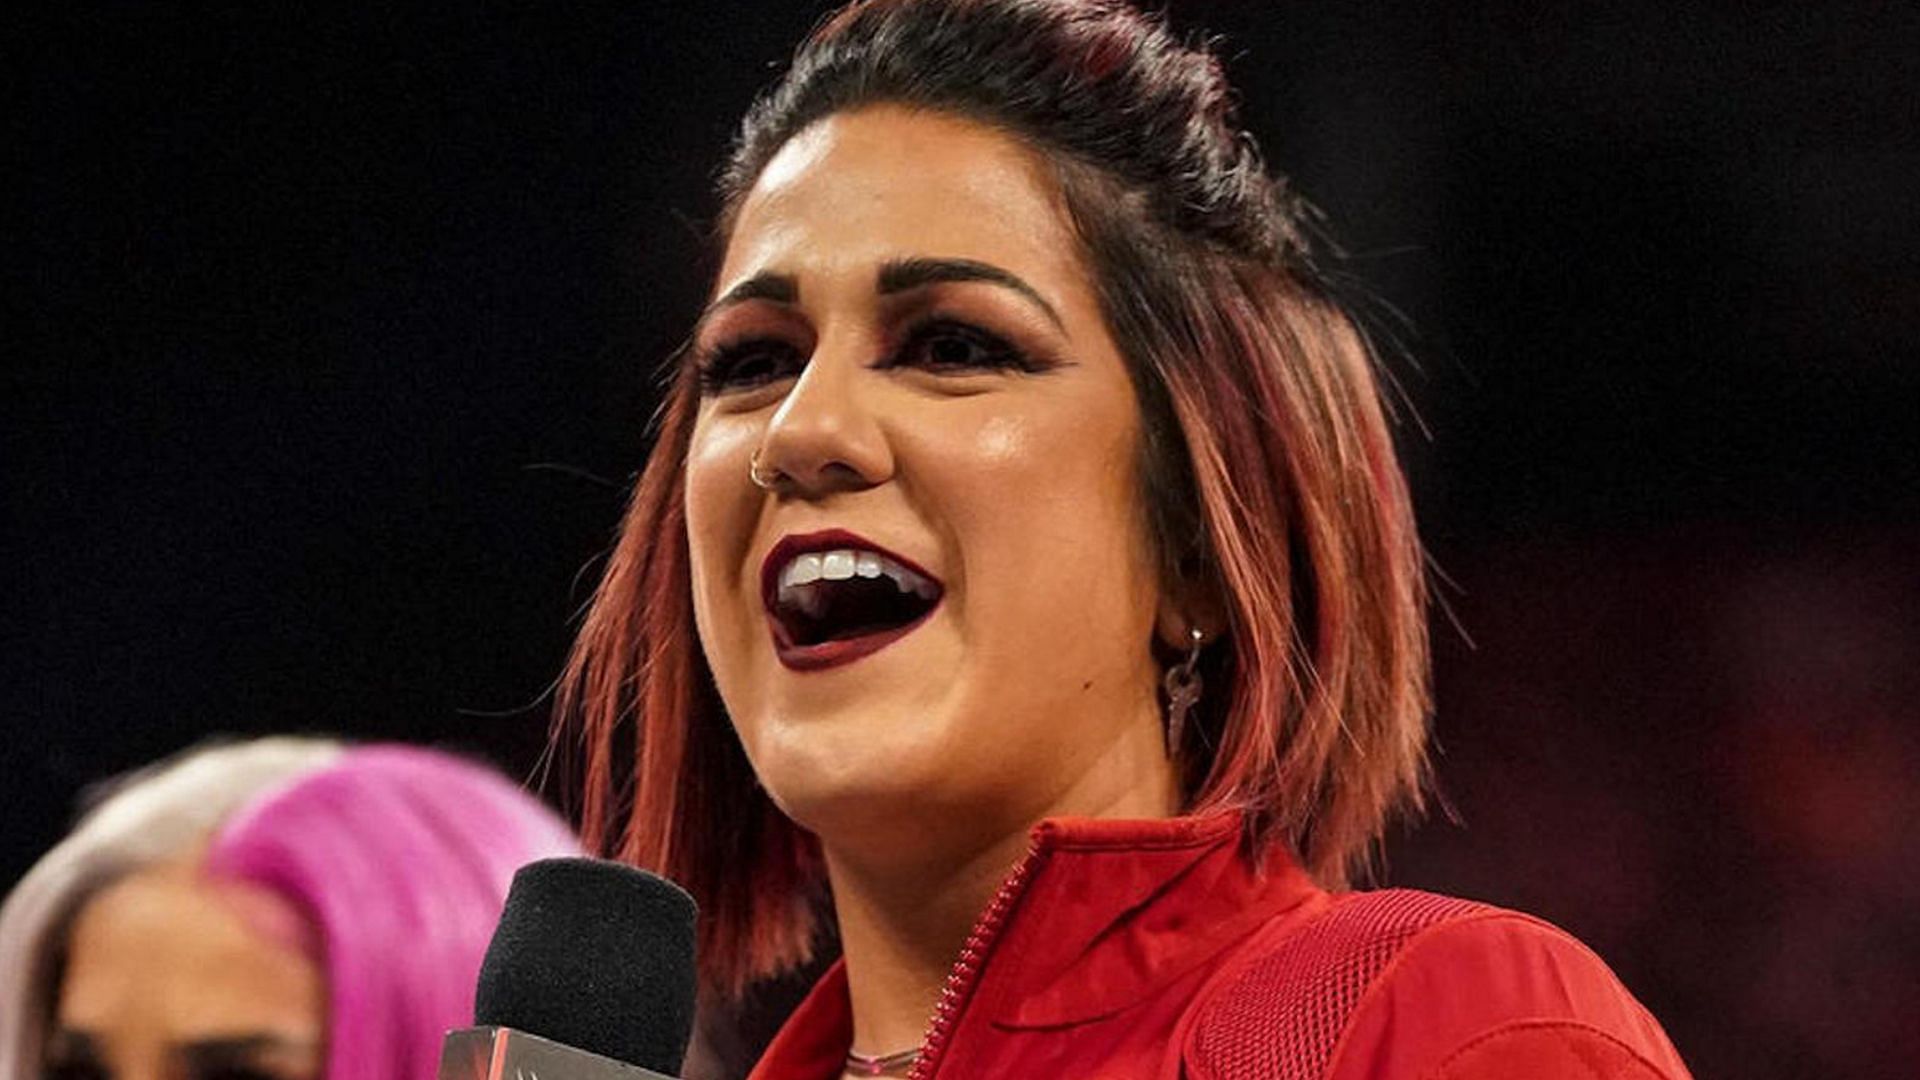 Bayley will be in action tonight on WWE SmackDown